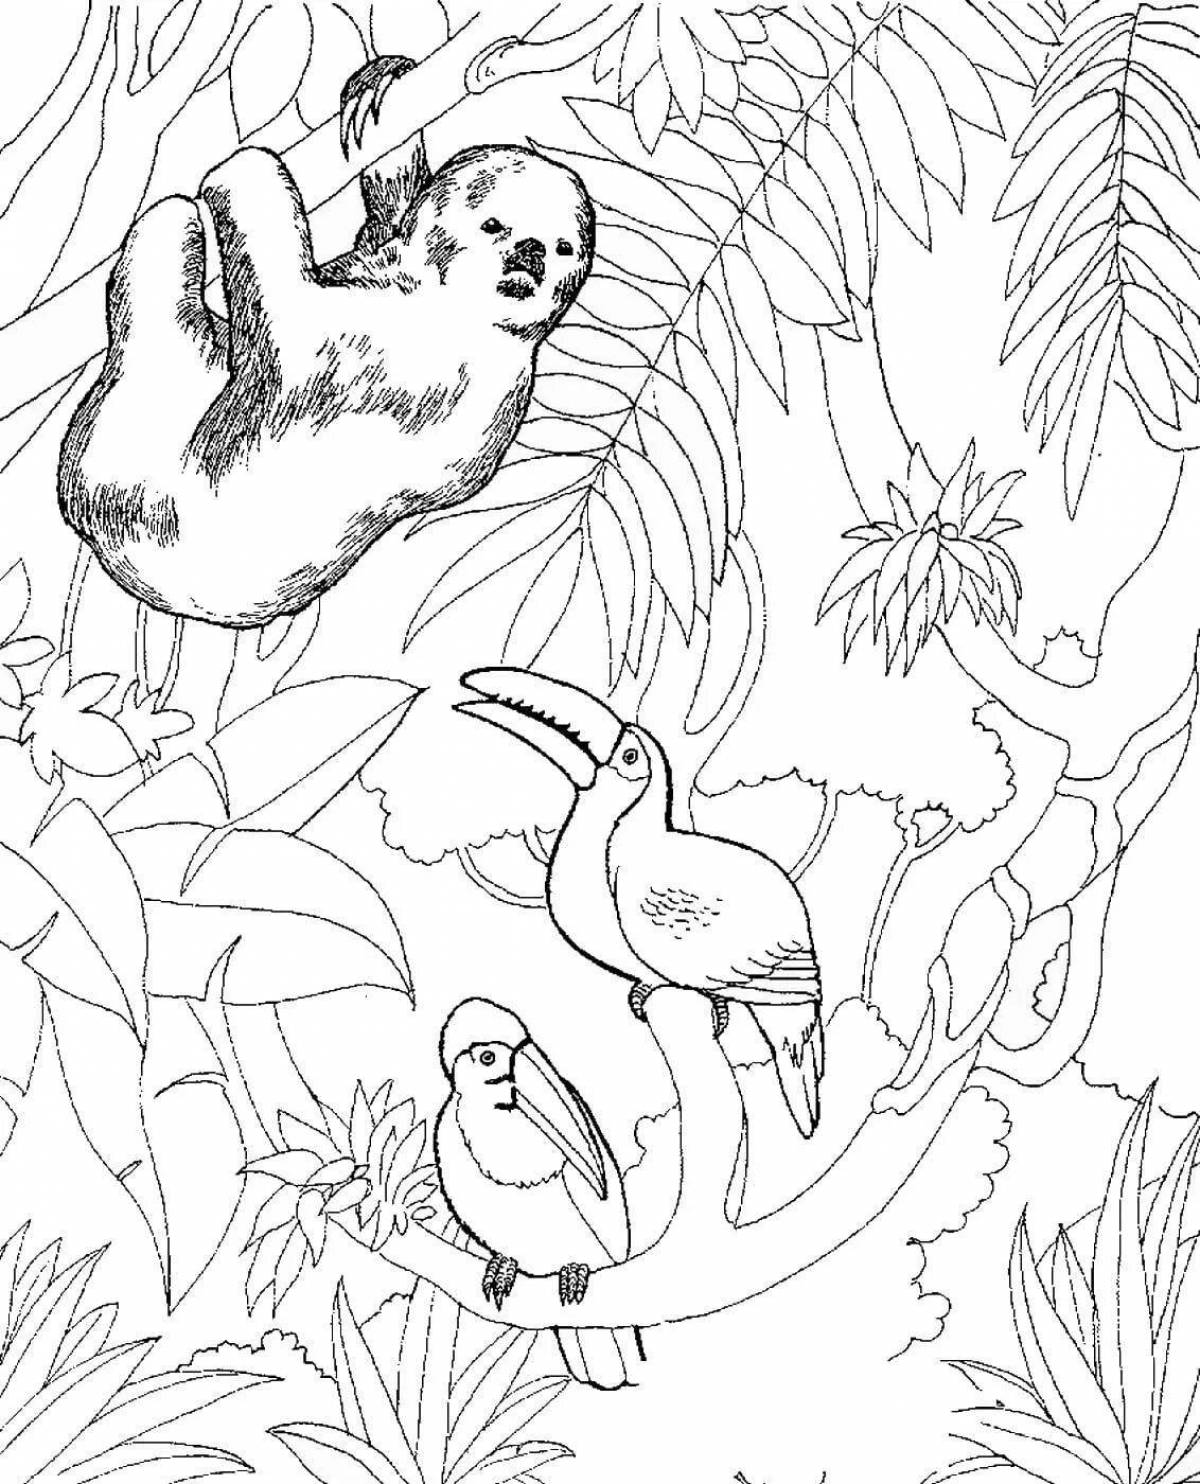 Coloring book shining tropical forest